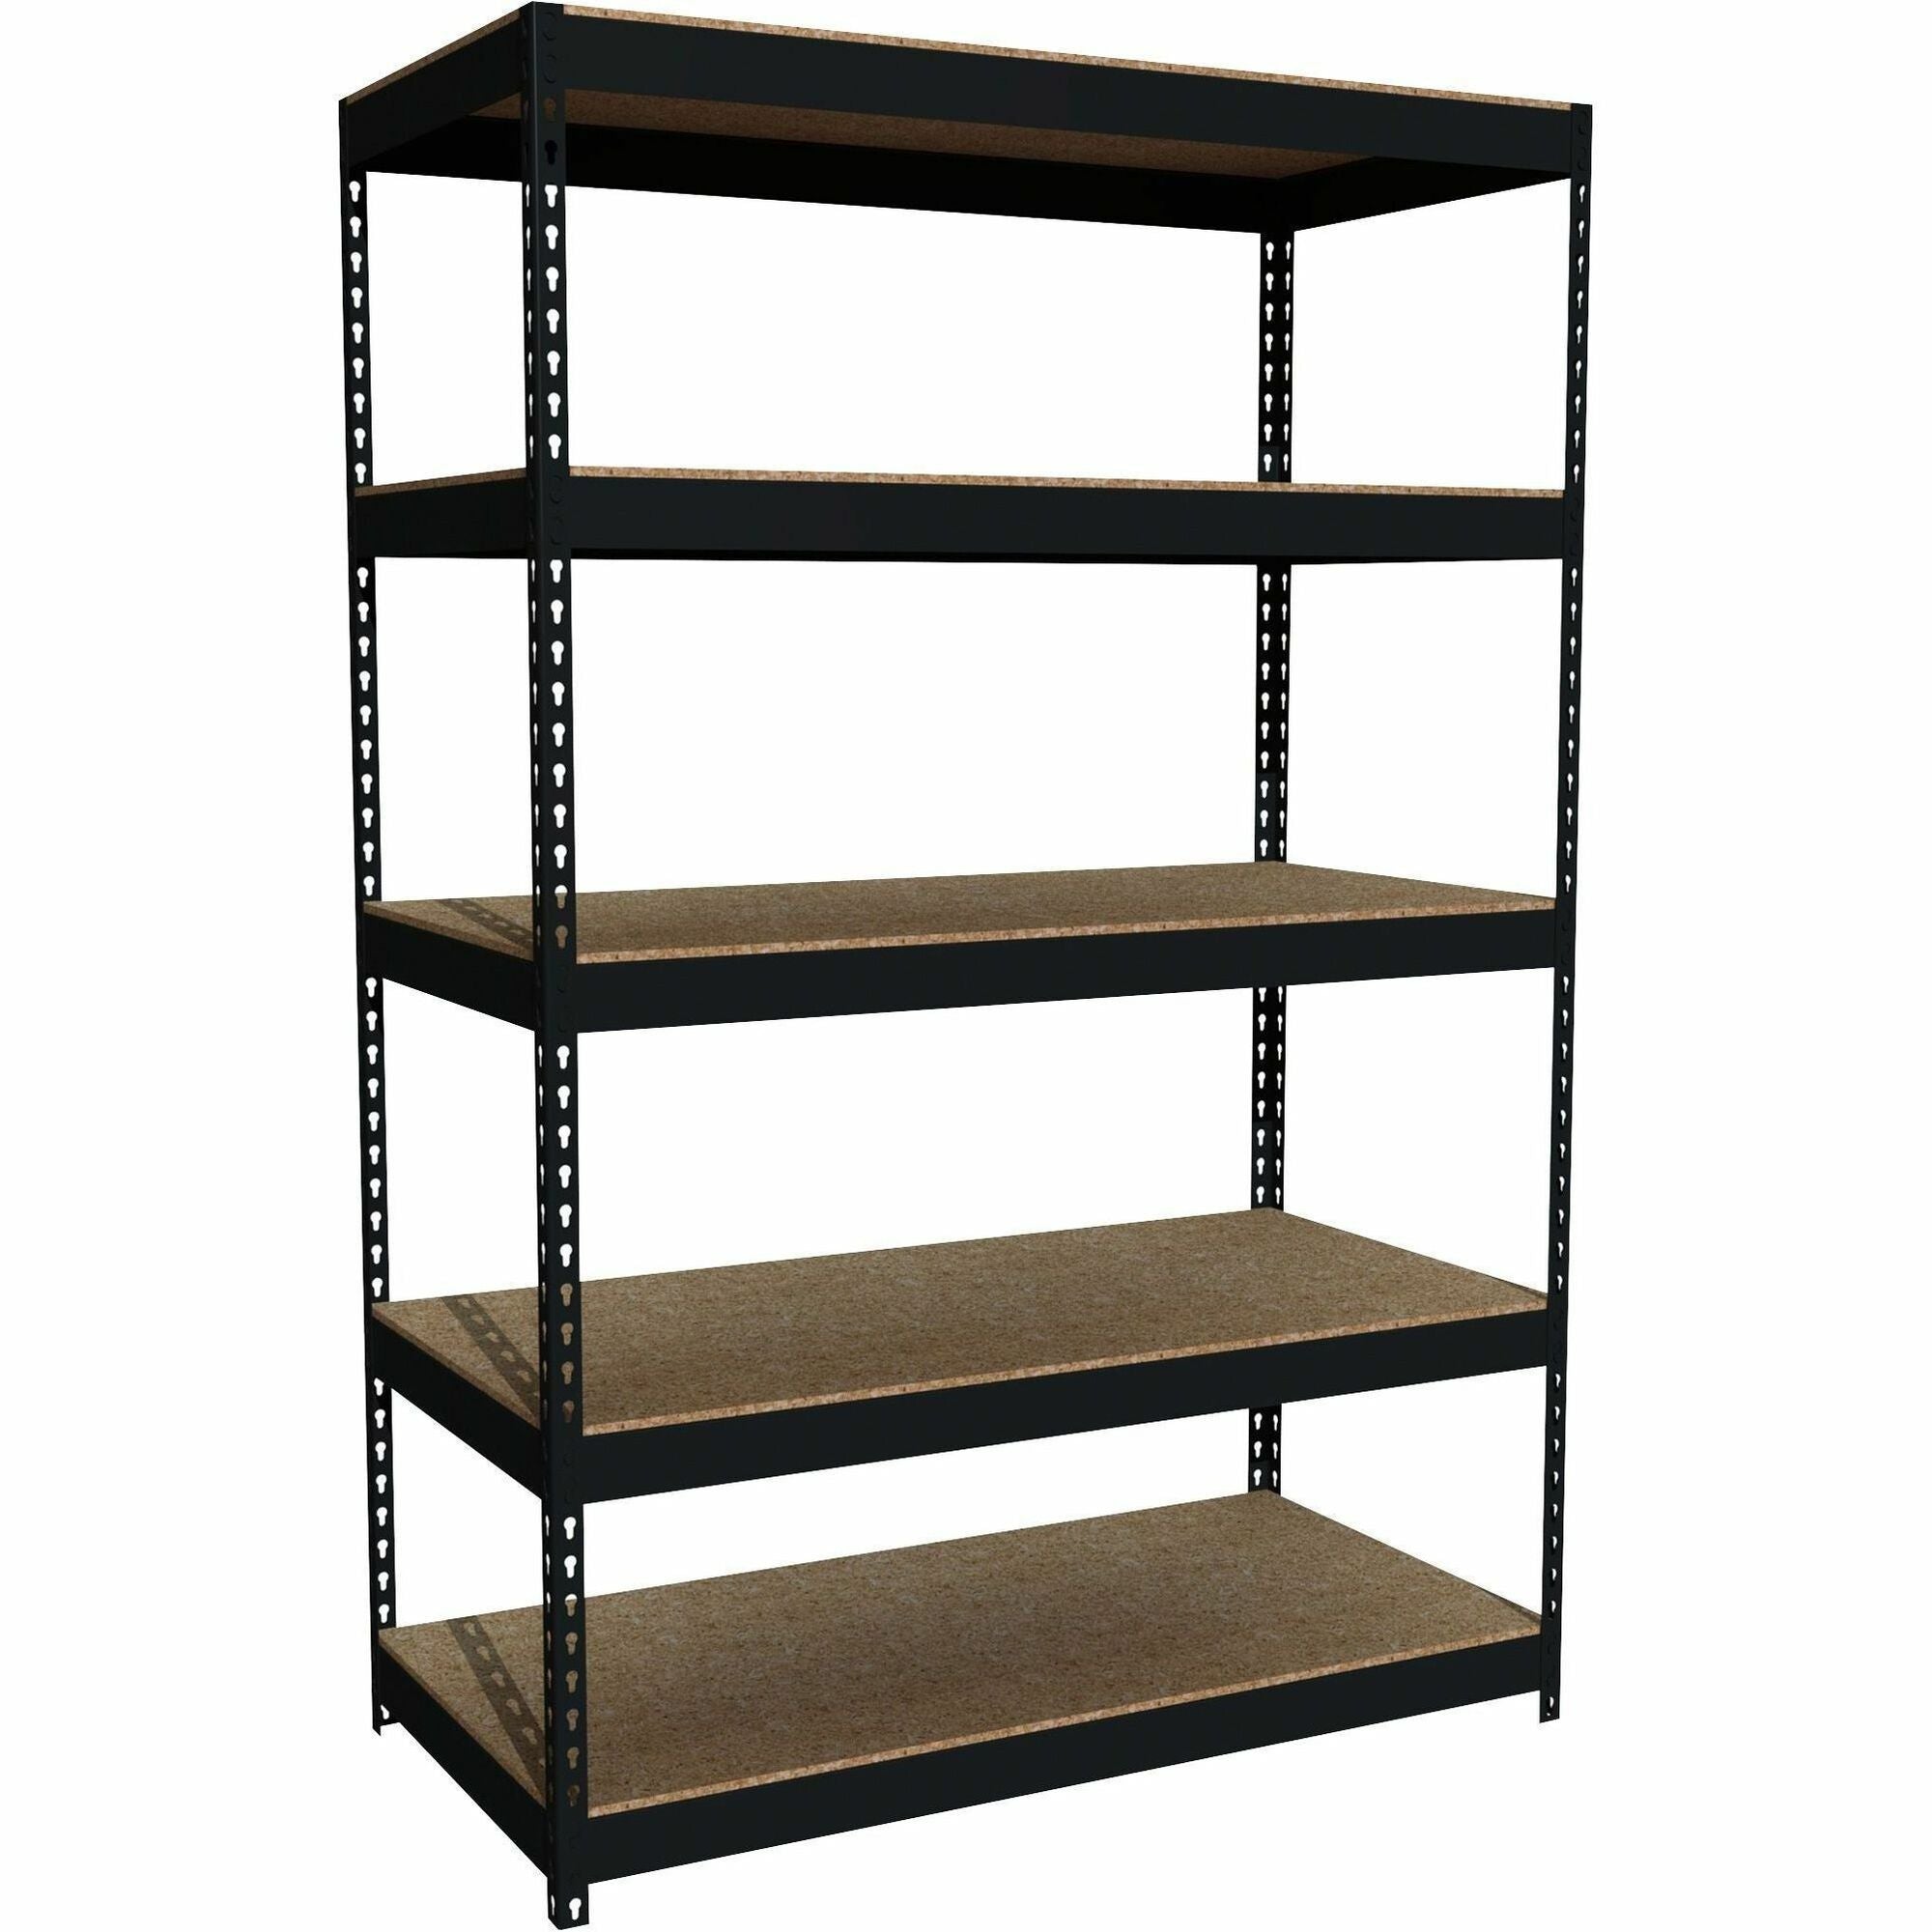 Lorell Fortress Riveted Shelving - 5 Shelf(ves) - 72" Height x 48" Width x 24" Depth - Rust Resistant - 28% Recycled - Black - Steel - 1 Each - 